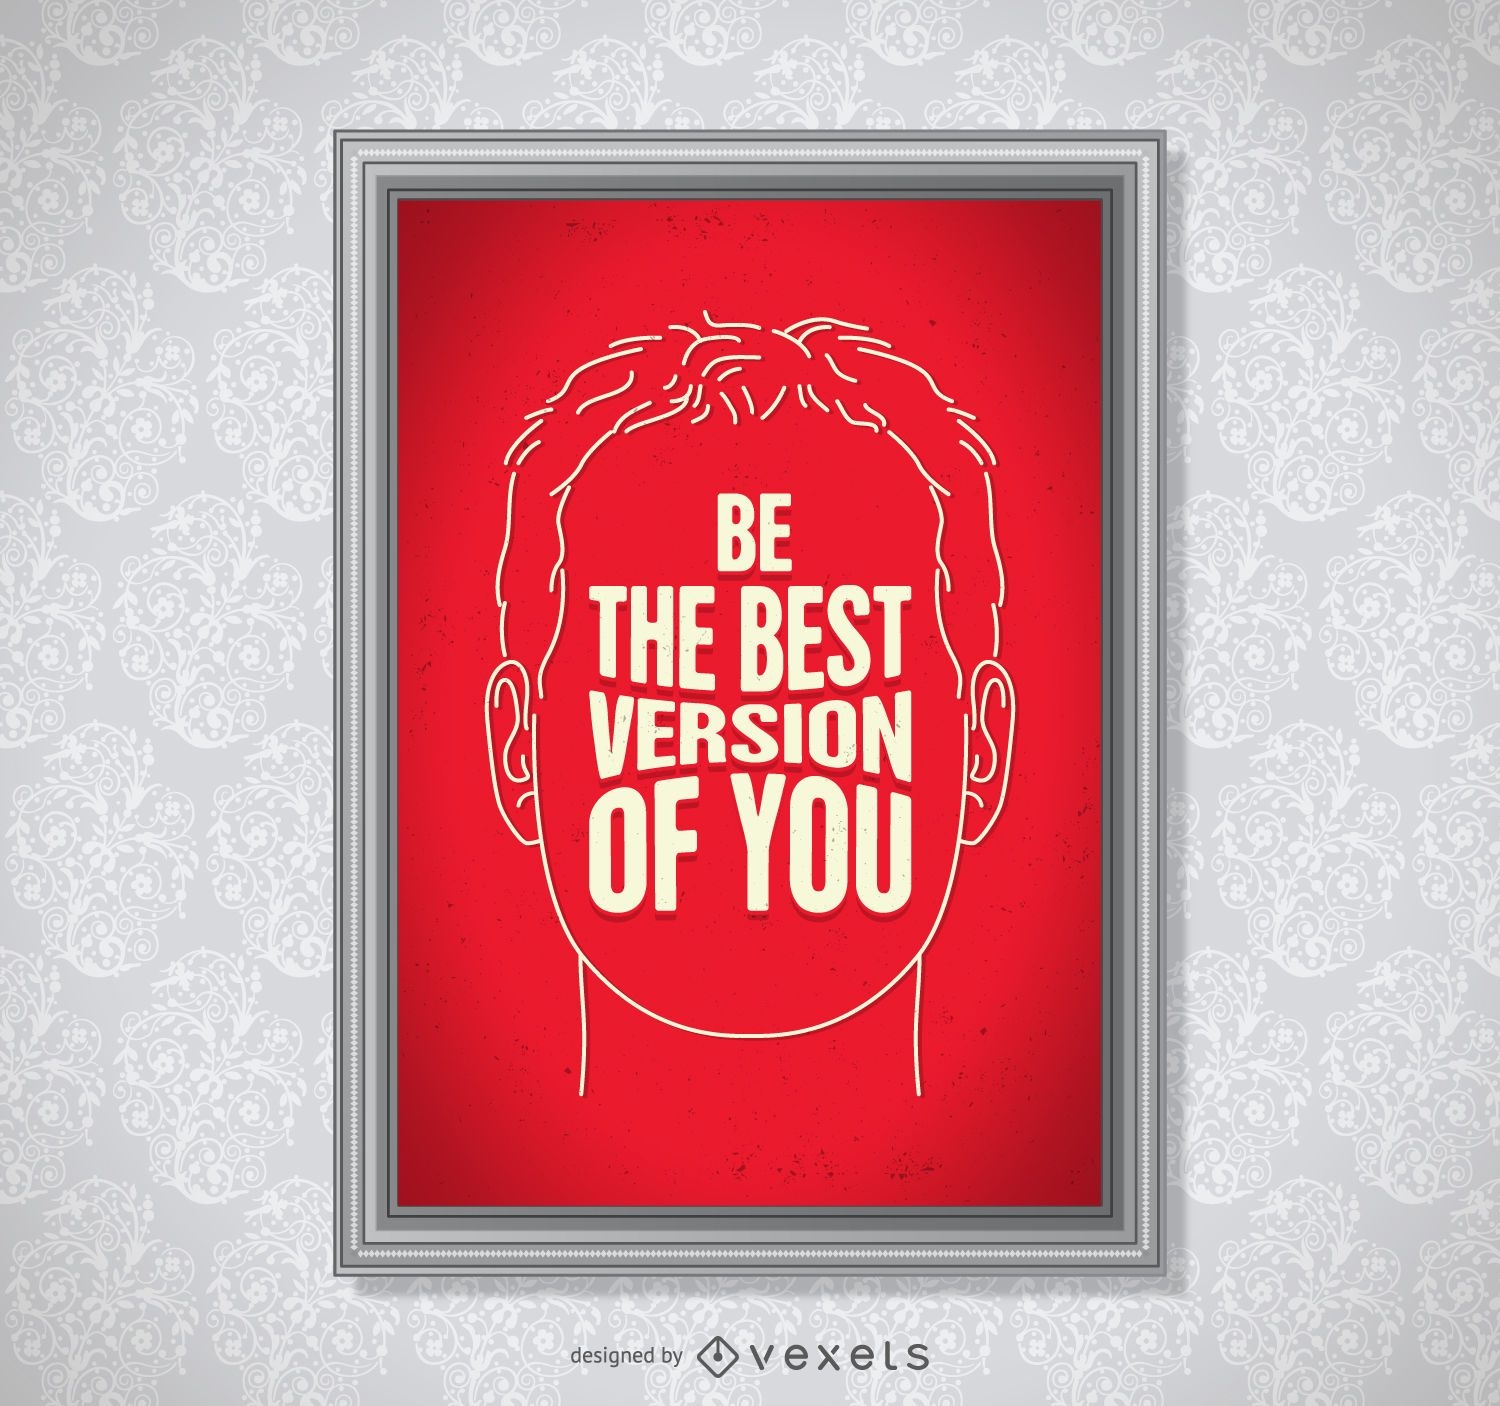 Be the best version of you poster